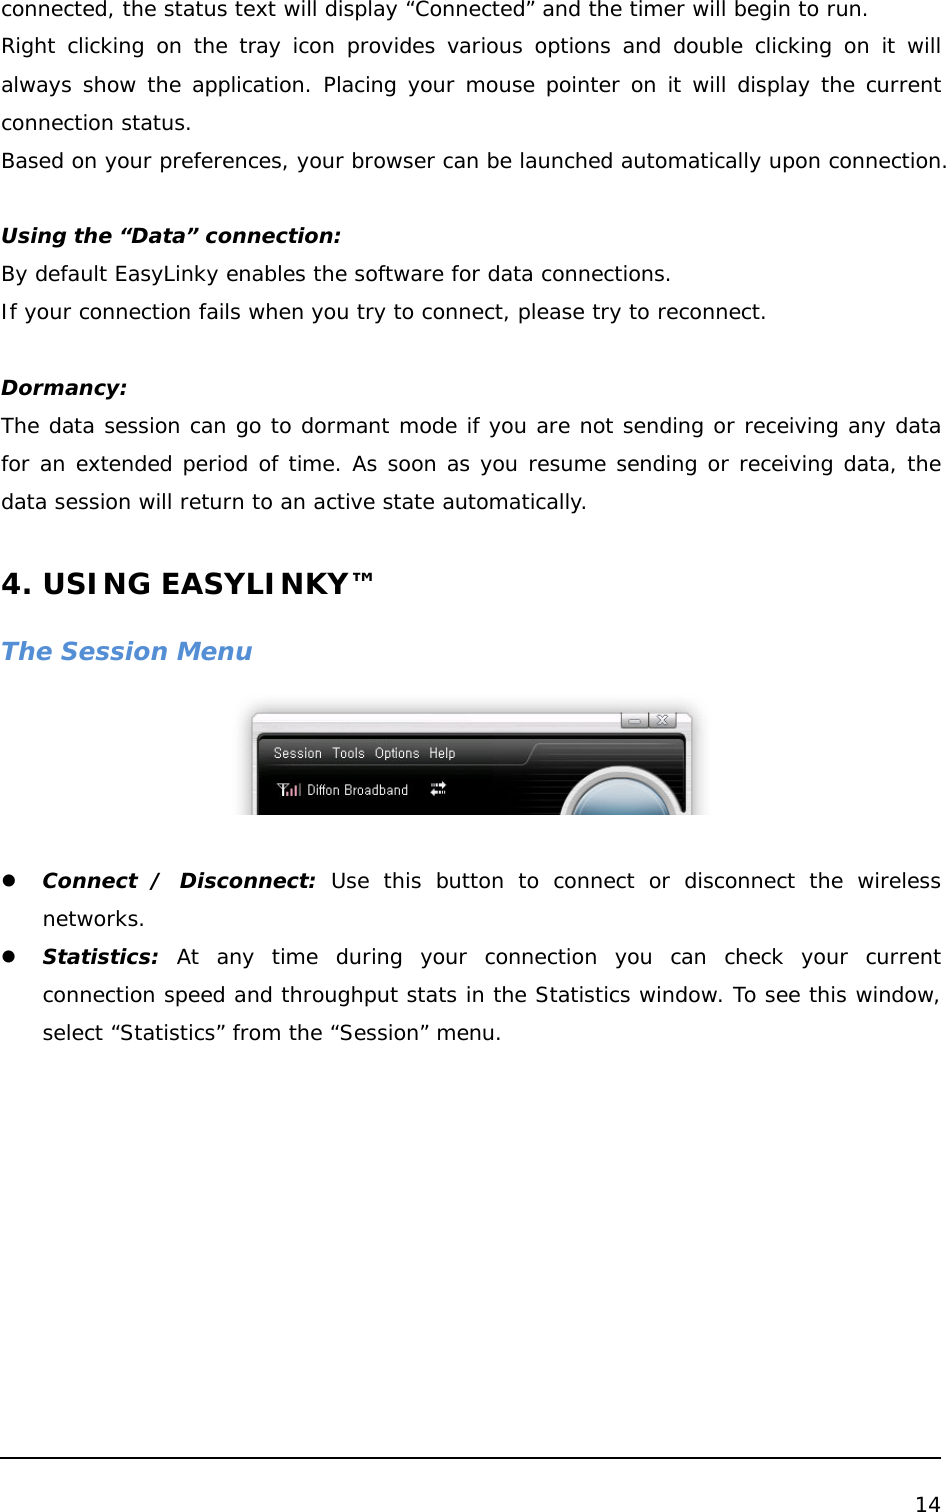  14  connected, the status text will display “Connected” and the timer will begin to run. Right clicking on the tray icon provides various options and double clicking on it will always show the application. Placing your mouse pointer on it will display the current connection status. Based on your preferences, your browser can be launched automatically upon connection.   Using the “Data” connection: By default EasyLinky enables the software for data connections. If your connection fails when you try to connect, please try to reconnect.  Dormancy: The data session can go to dormant mode if you are not sending or receiving any data for an extended period of time. As soon as you resume sending or receiving data, the data session will return to an active state automatically.  4. USING EASYLINKY™  The Session Menu   z Connect / Disconnect: Use this button to connect or disconnect the wireless networks. z Statistics: At any time during your connection you can check your current connection speed and throughput stats in the Statistics window. To see this window, select “Statistics” from the “Session” menu. 